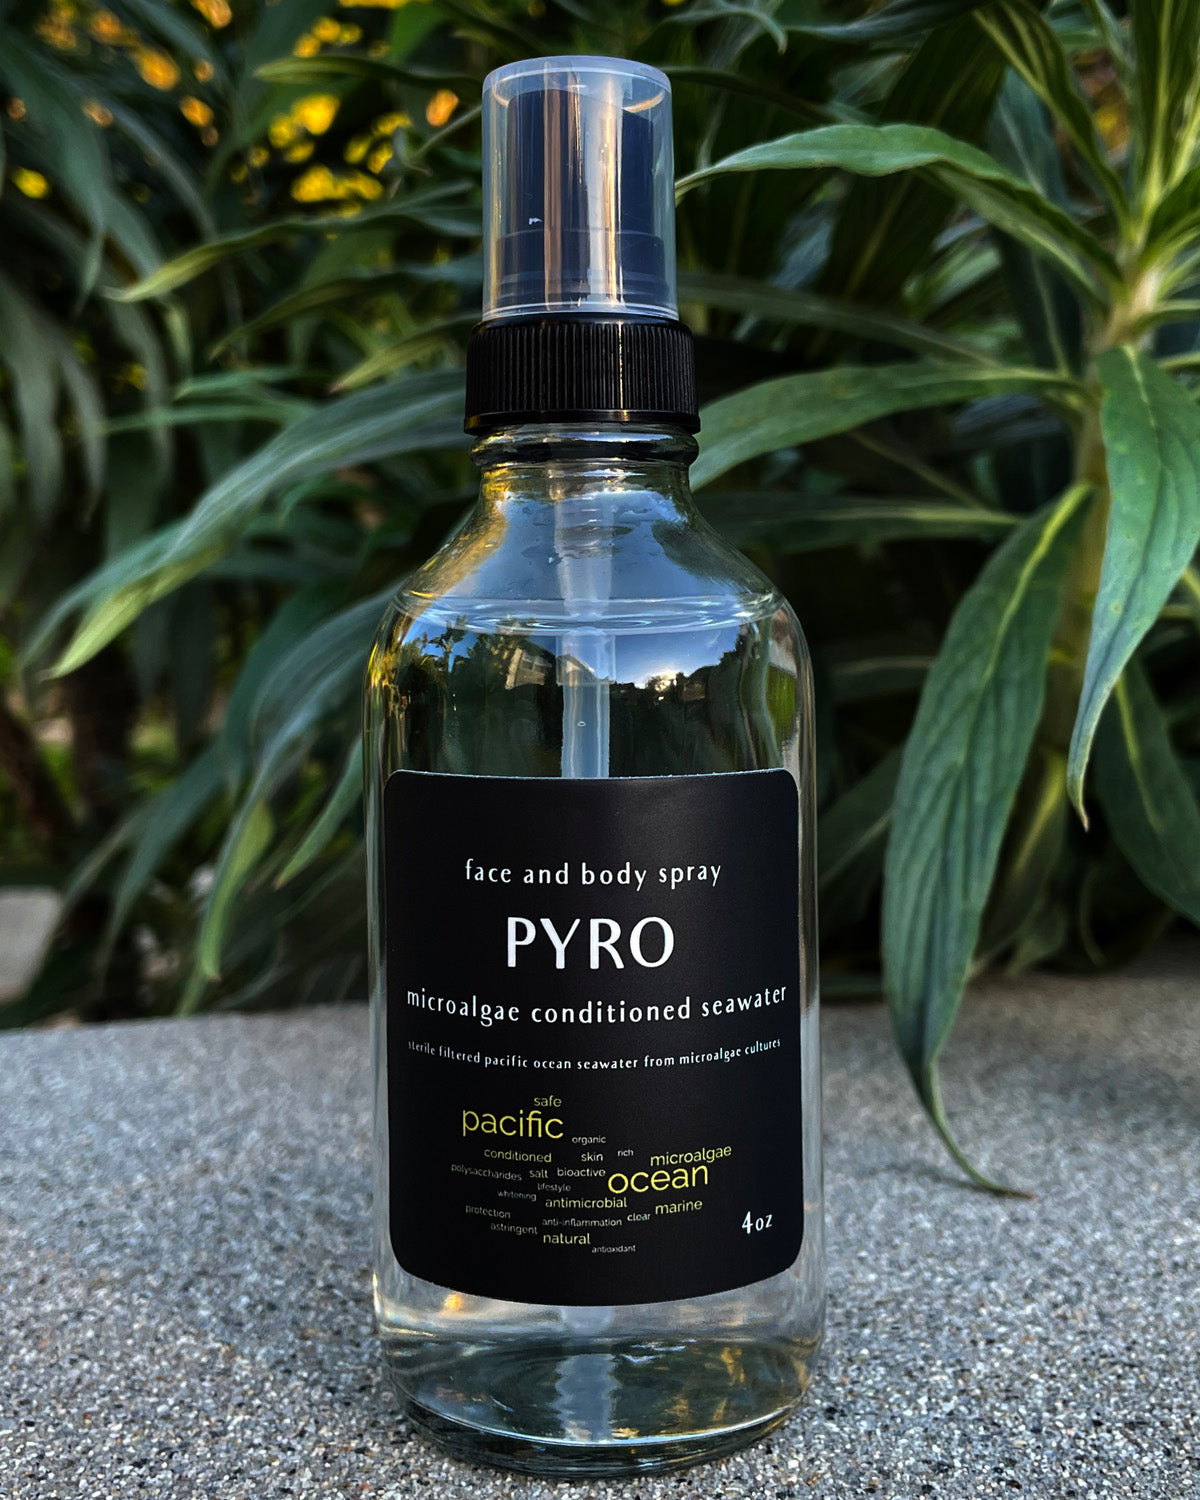 PYRO face and body spray with microalgae treated seawater